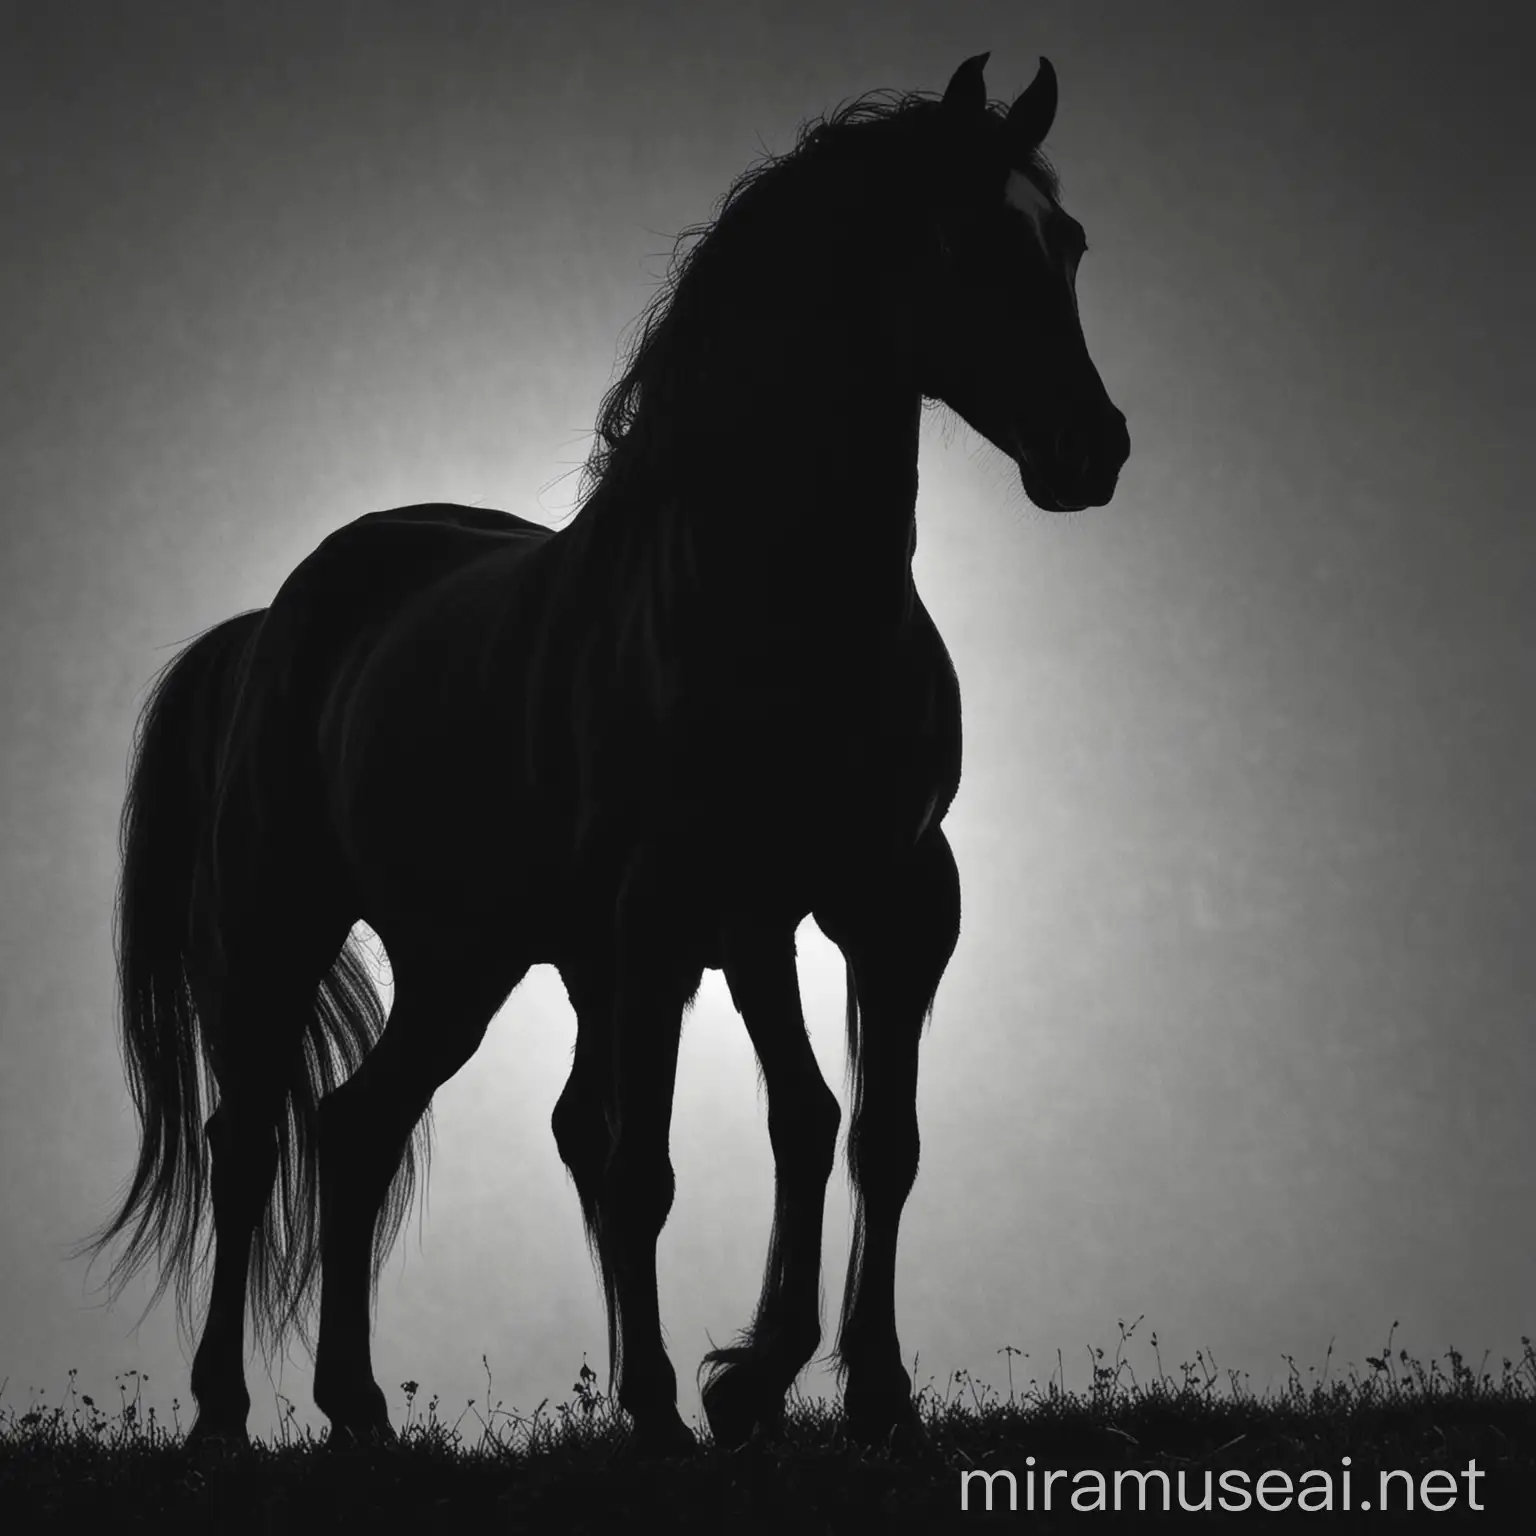 Silhouette of Tovero Horse in Black and White